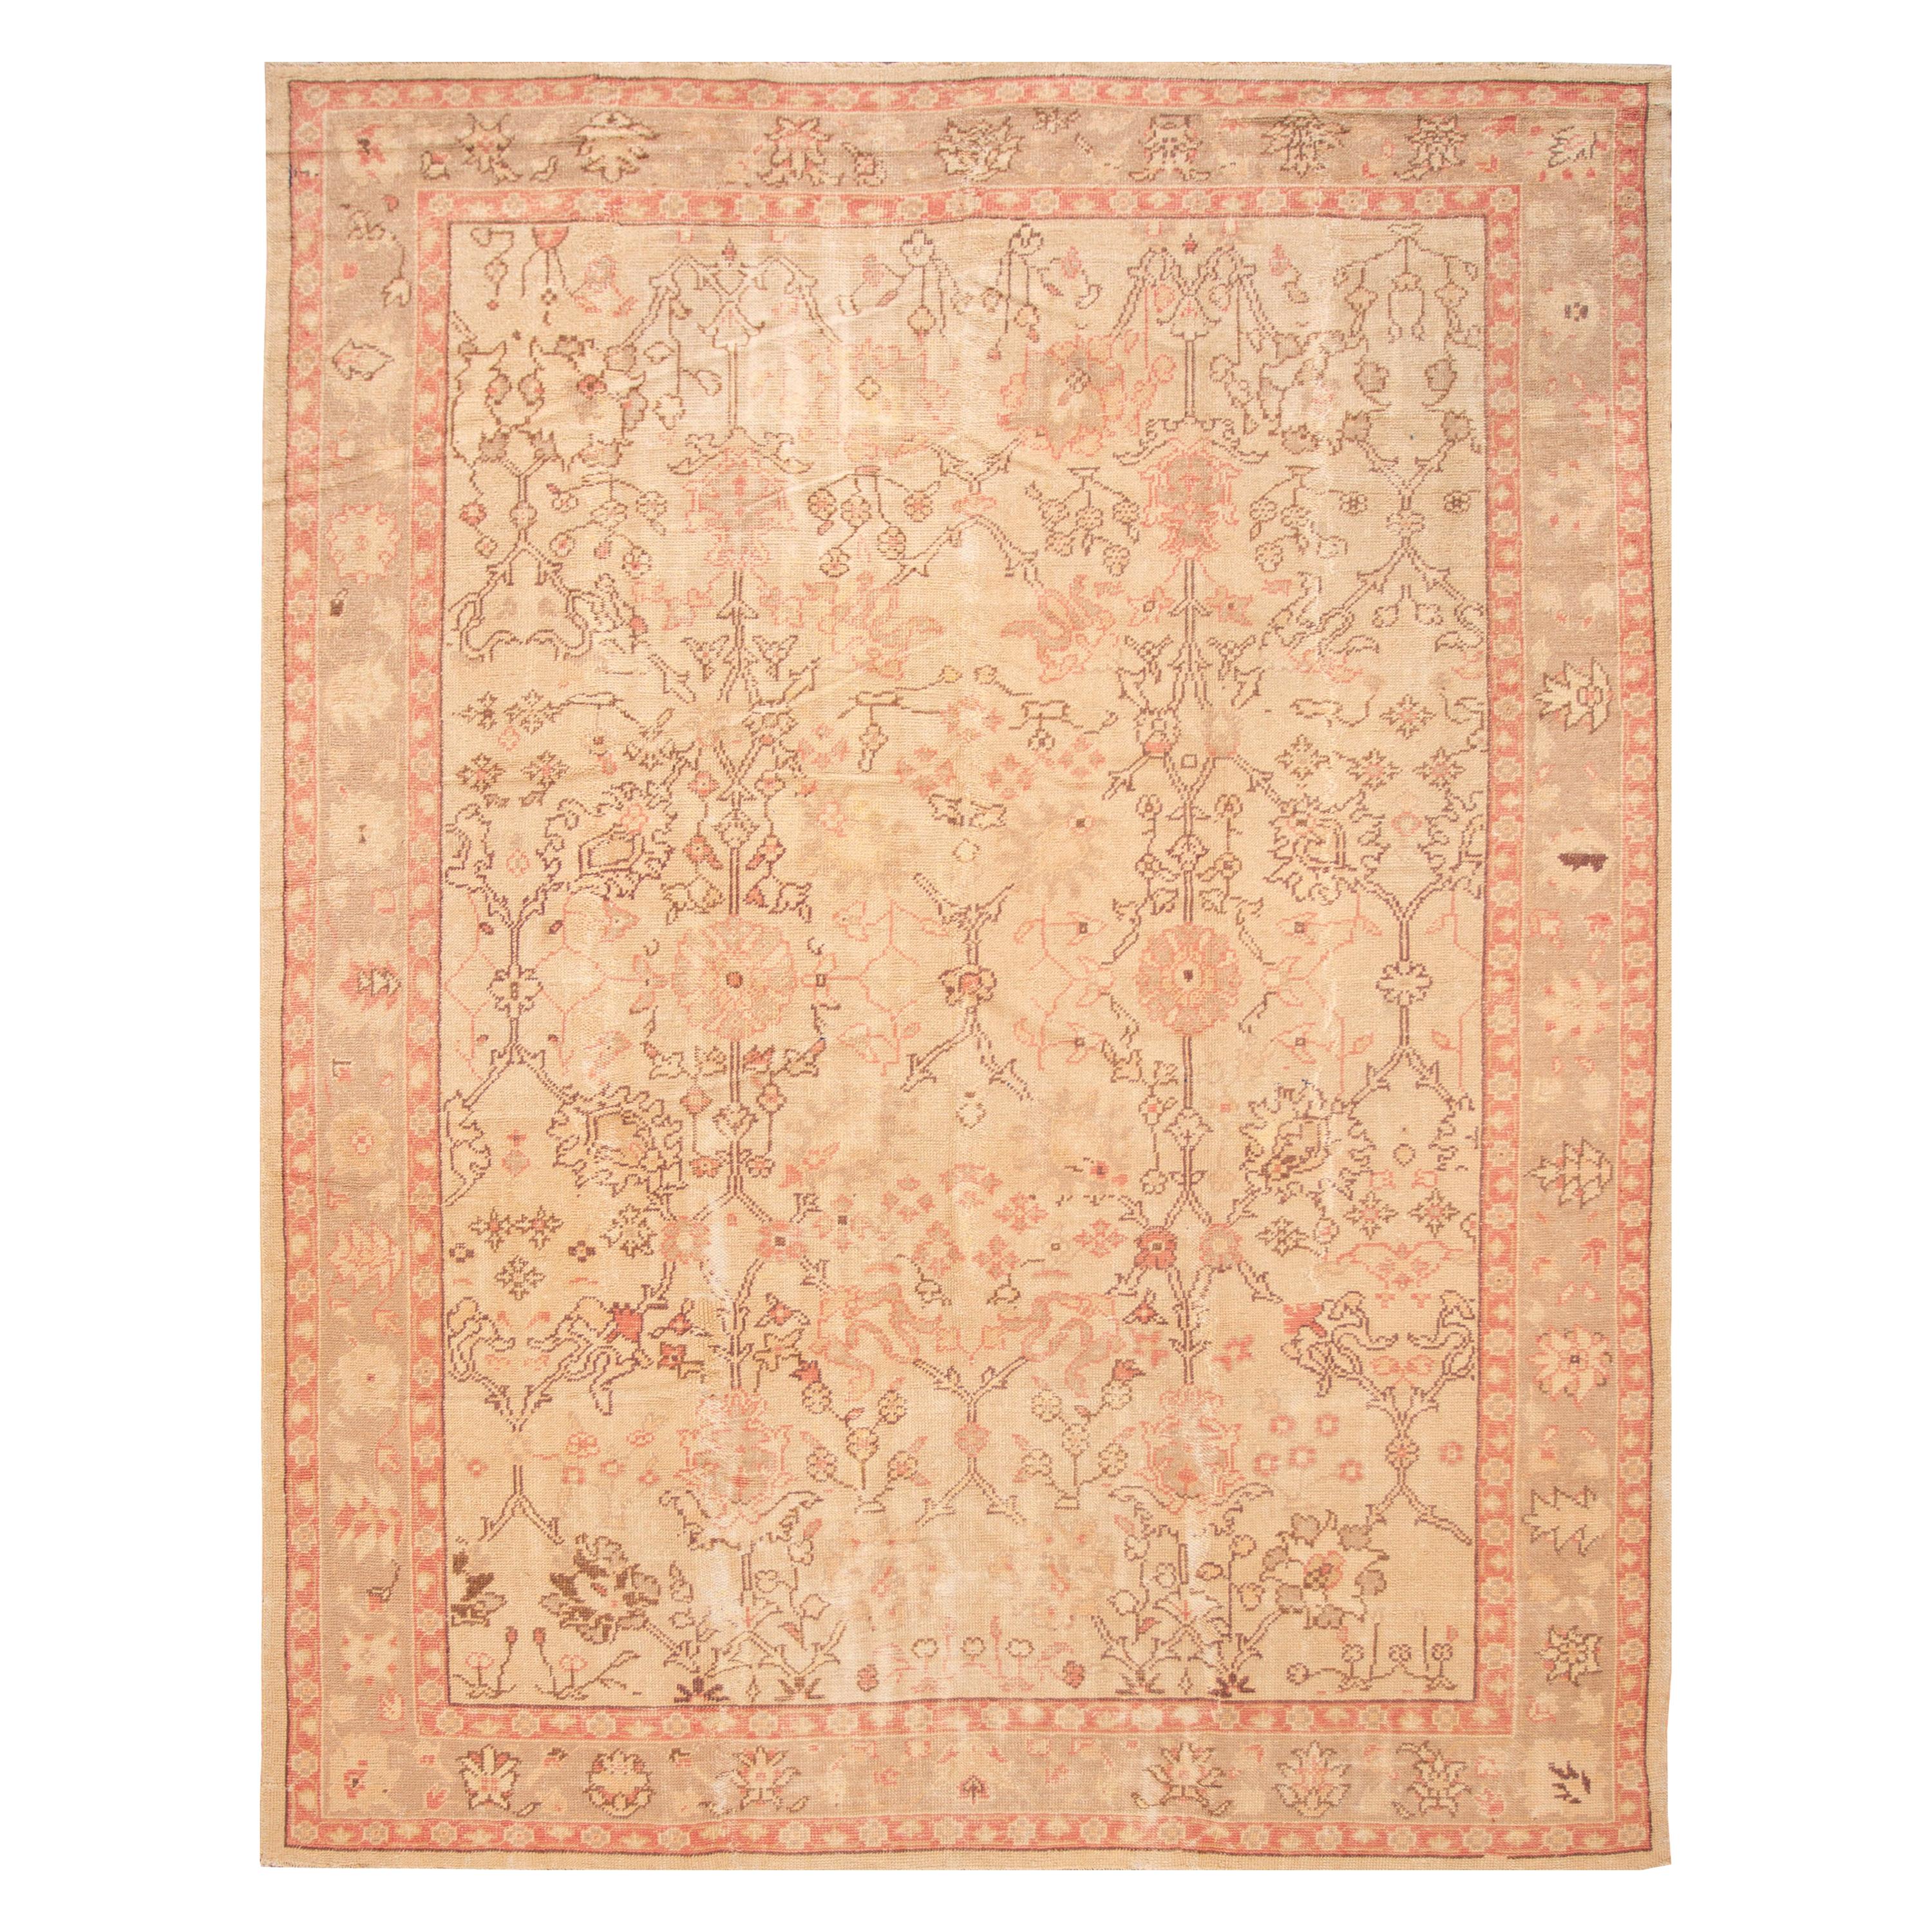 Early 20th Century Antique Oushak Wool Rug